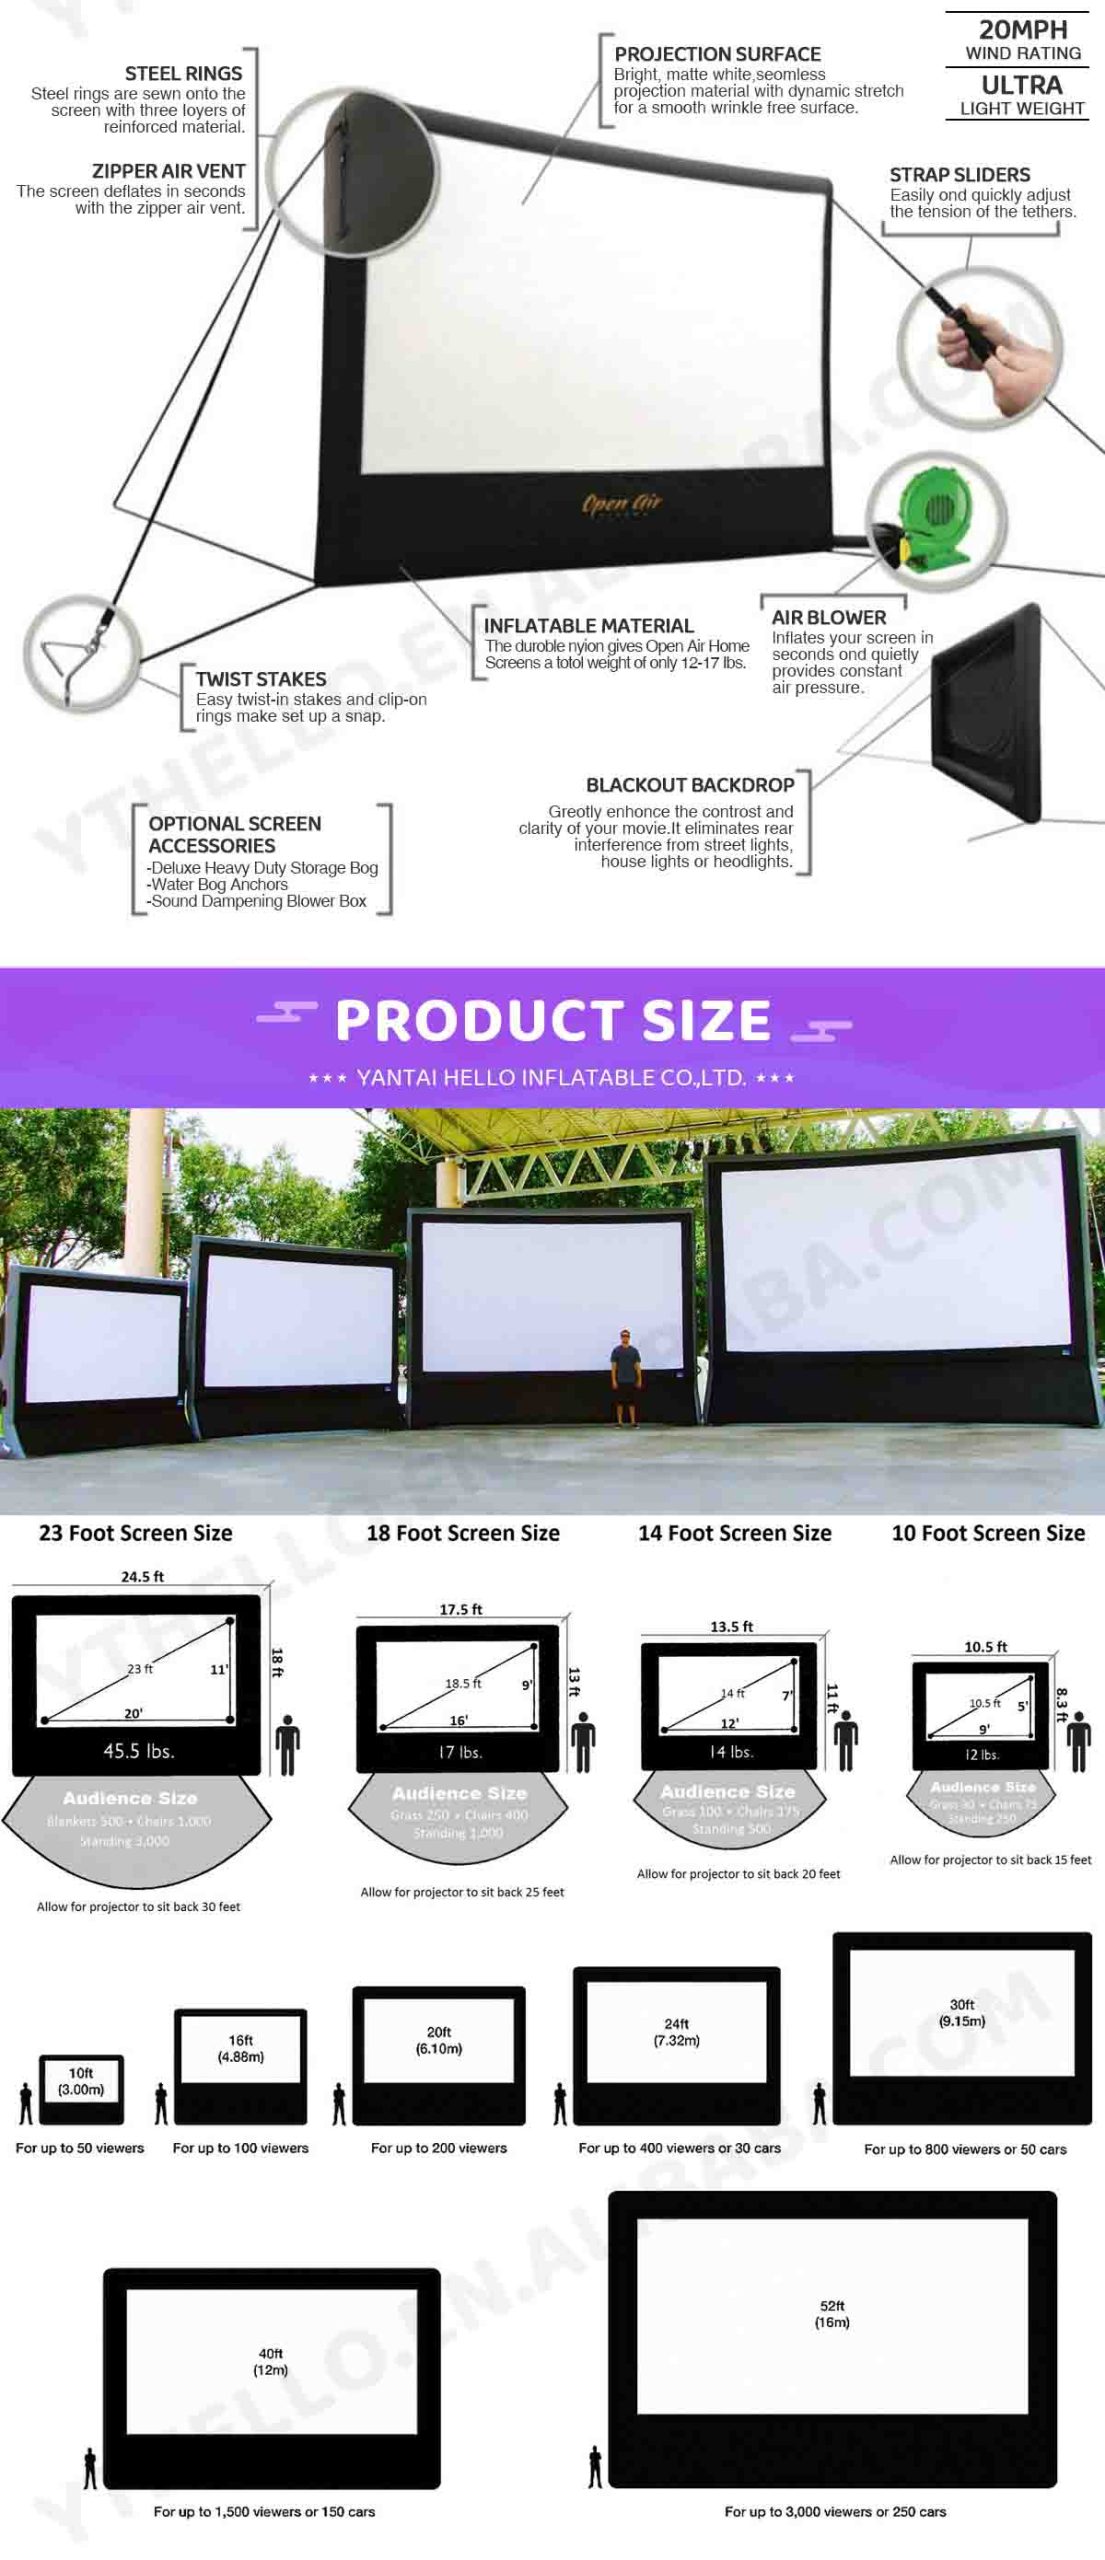 Projector Cinema Screens Big Party Film Airscreen Portable Blow Up Outdoor Mobill Air Projection Movie Inflatable Screen插图2